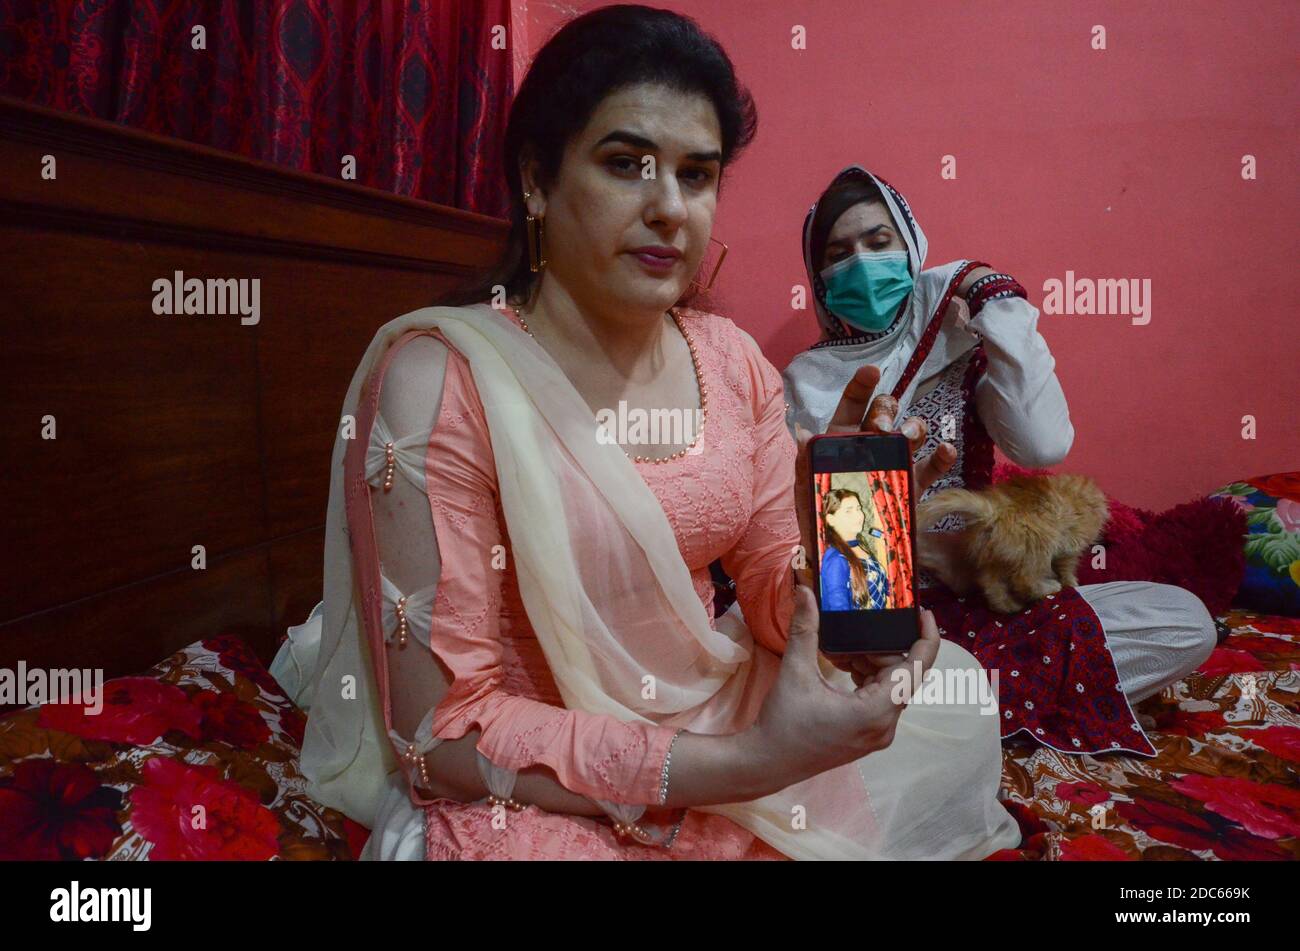 Peshawar, Pakistan. 19th Nov, 2020. Transwoman Zeeshan Khan (l) shows a picture of her friend Gul Panra. In September 2020 her friend Panra was killed. (to dpa: 'Transgender in Pakistan lament hate and violent crime') Credit: Hasnain Ali/dpa/Alamy Live News Stock Photo